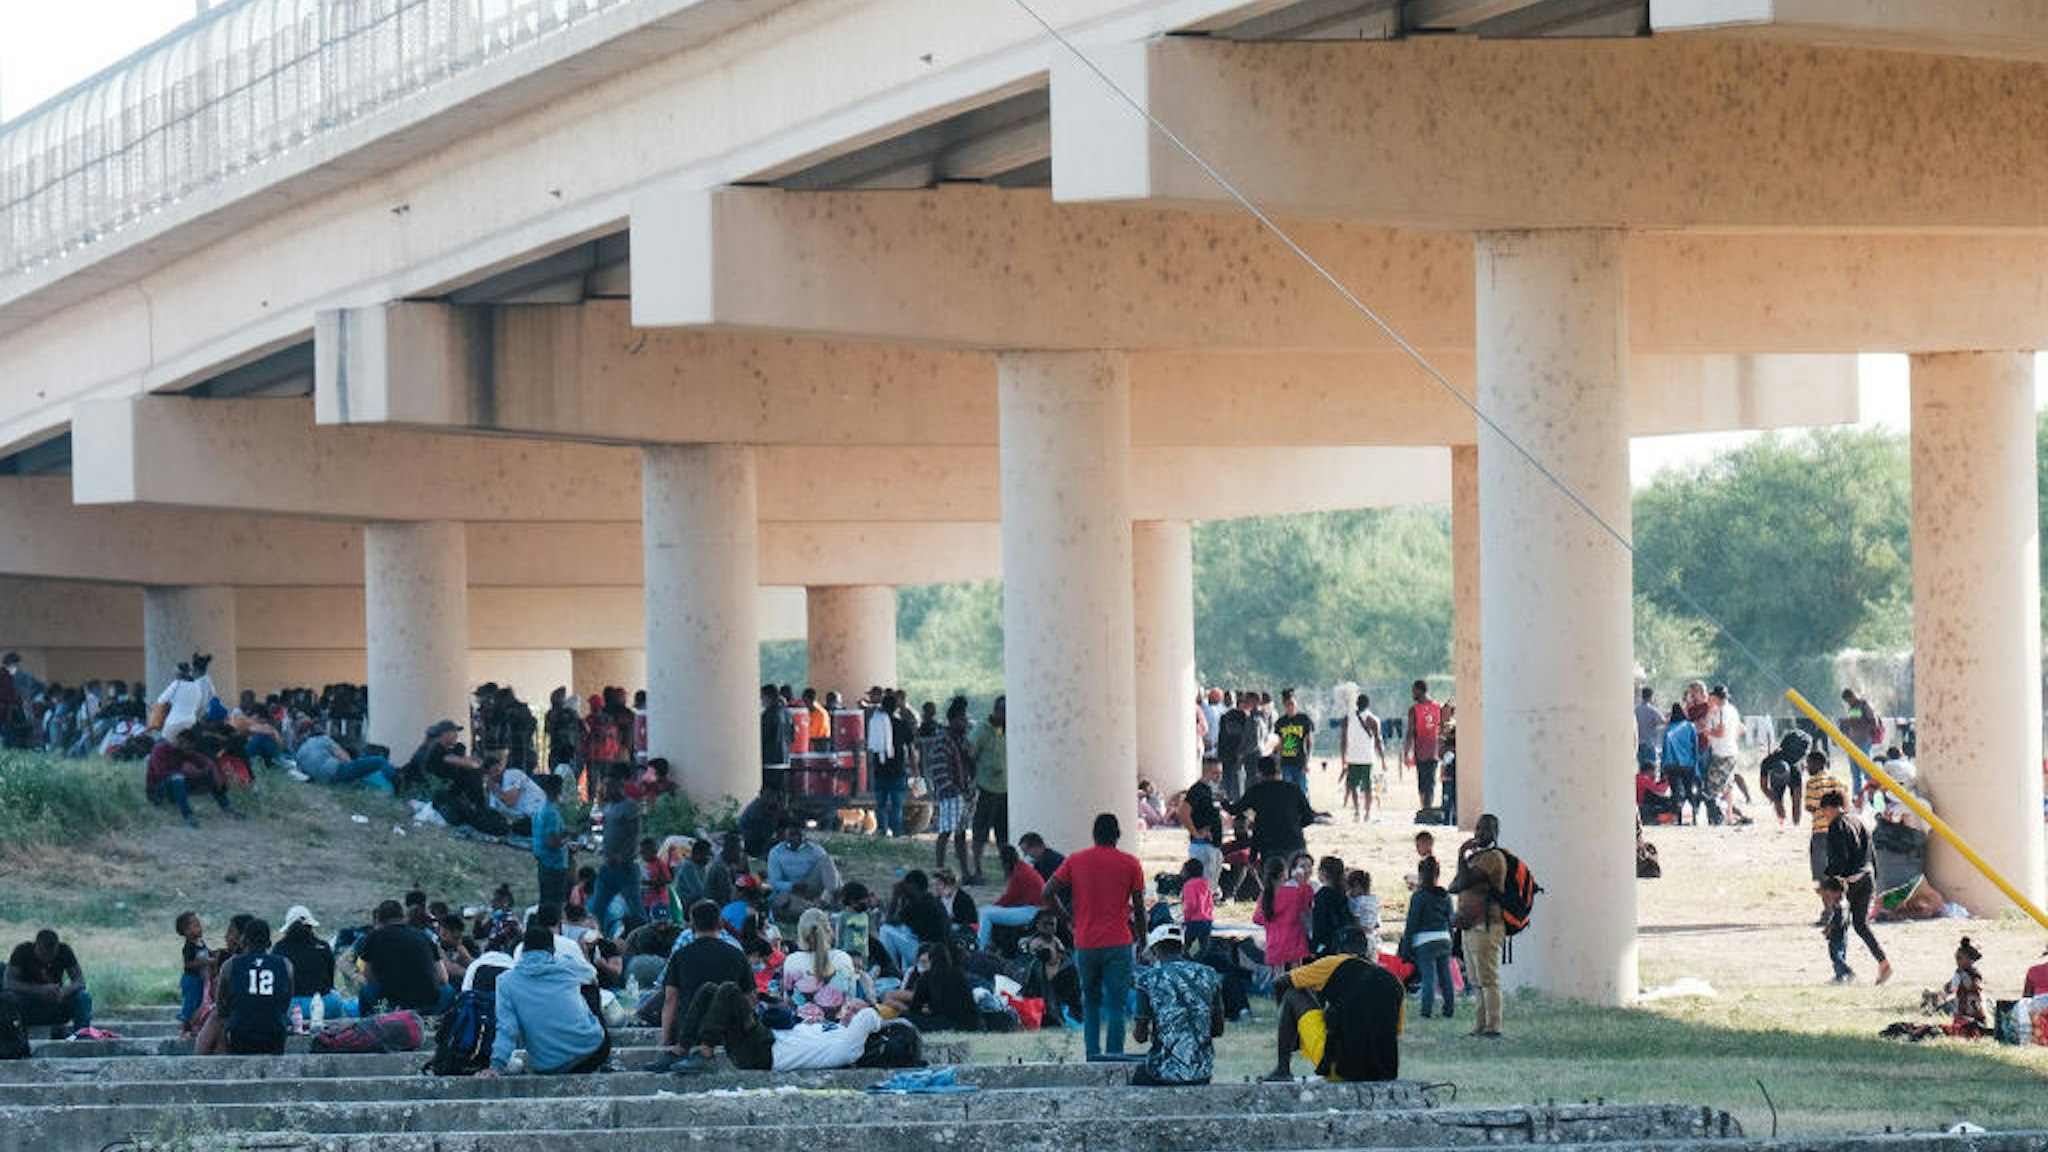 TEXAS, USA - SEPTEMBER 19: Migrants are seen at the Rio Grande near the Del Rio-Acuna Port of Entry in Del Rio, Texas, on September 18, 2021. - The United States said on September 18 that it would ramp up deportation flights for thousands of migrants who flooded into the Texas border city of Del Rio, as authorities scramble to alleviate a burgeoning crisis for President Joe Biden's administration. The migrants who poured into the city, many of them Haitian, were being held in an area controlled by US Customs and Border Protection (CBP) beneath the Del Rio International Bridge, which carries traffic across the Rio Grande river into Mexico. (Photo by Charlie C. Peebles/Anadolu Agency via Getty Images)